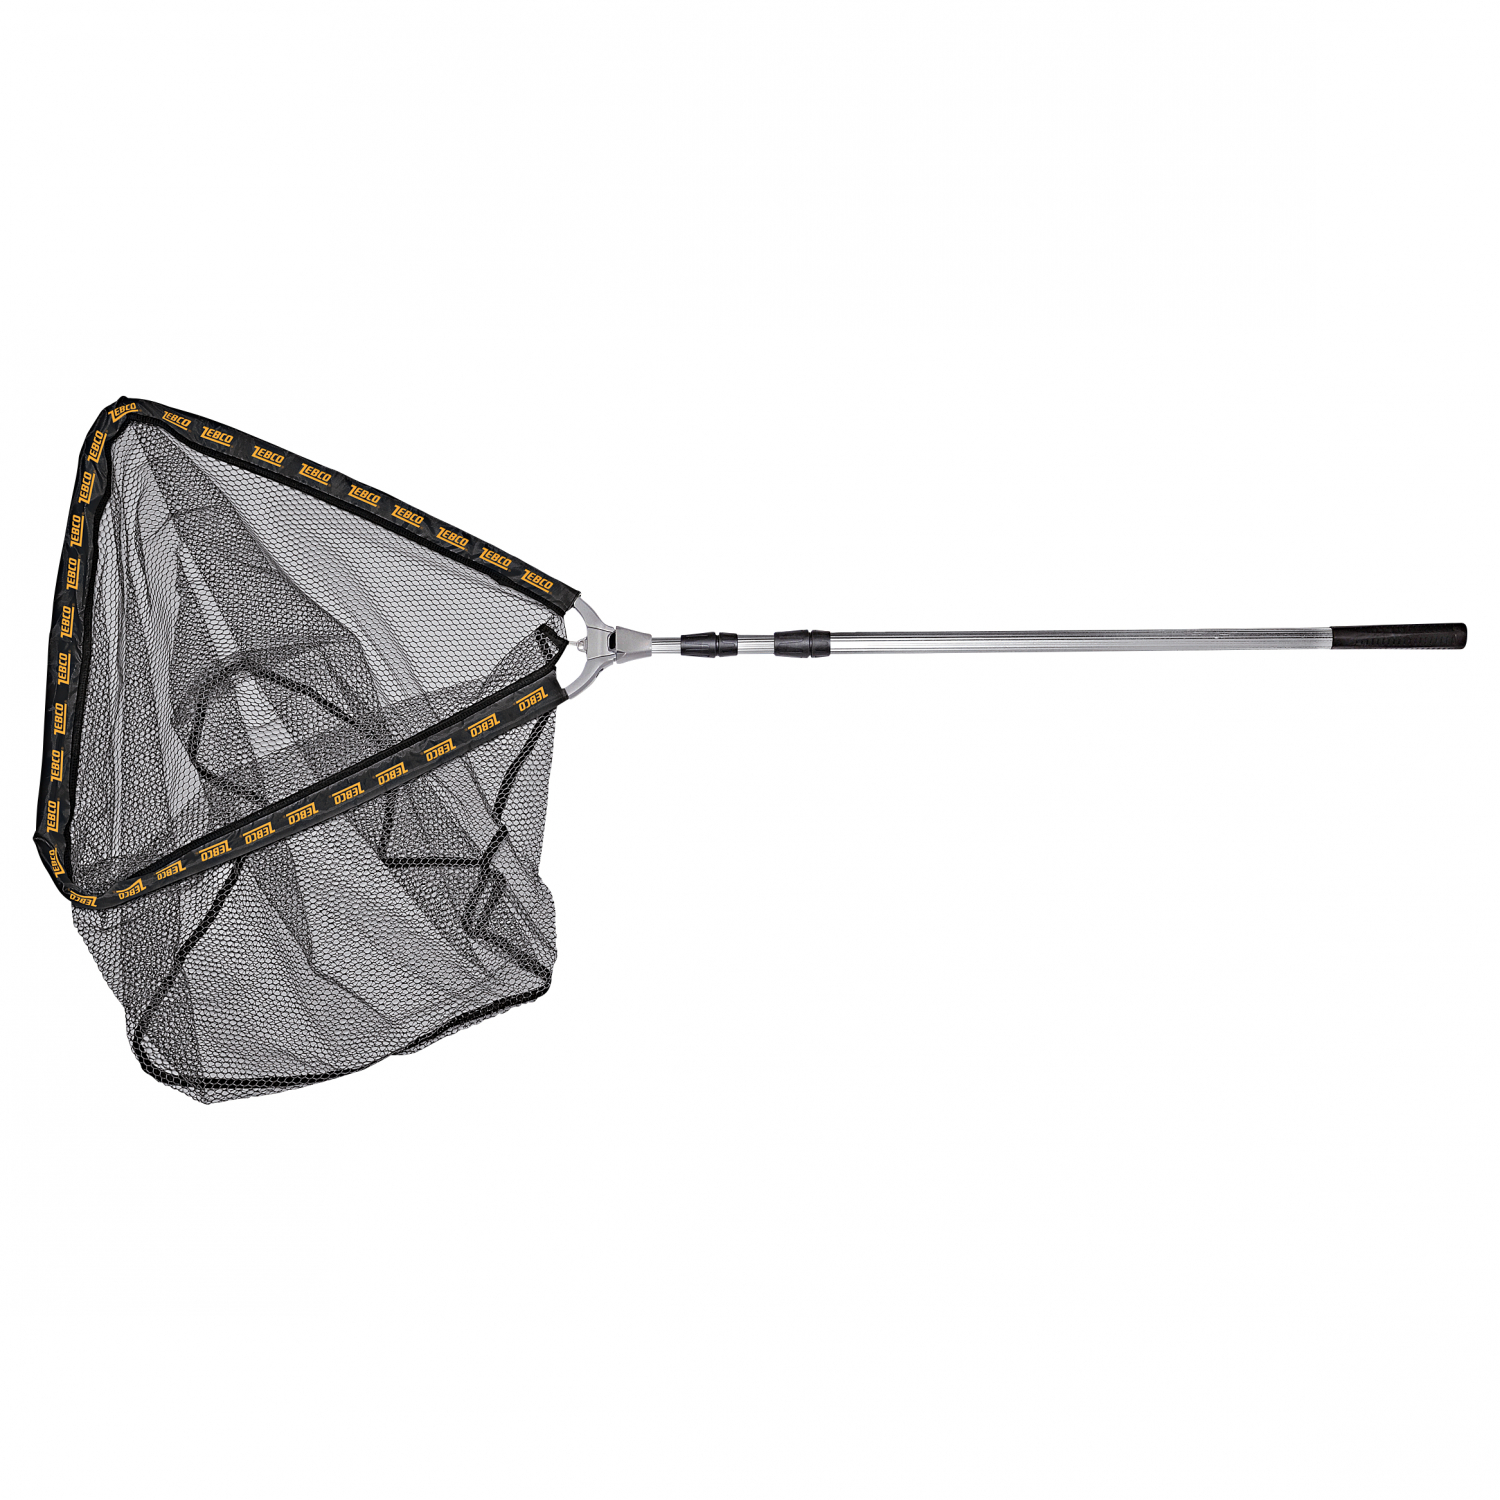 Zebco Telescopic Rubber Landing Net at low prices